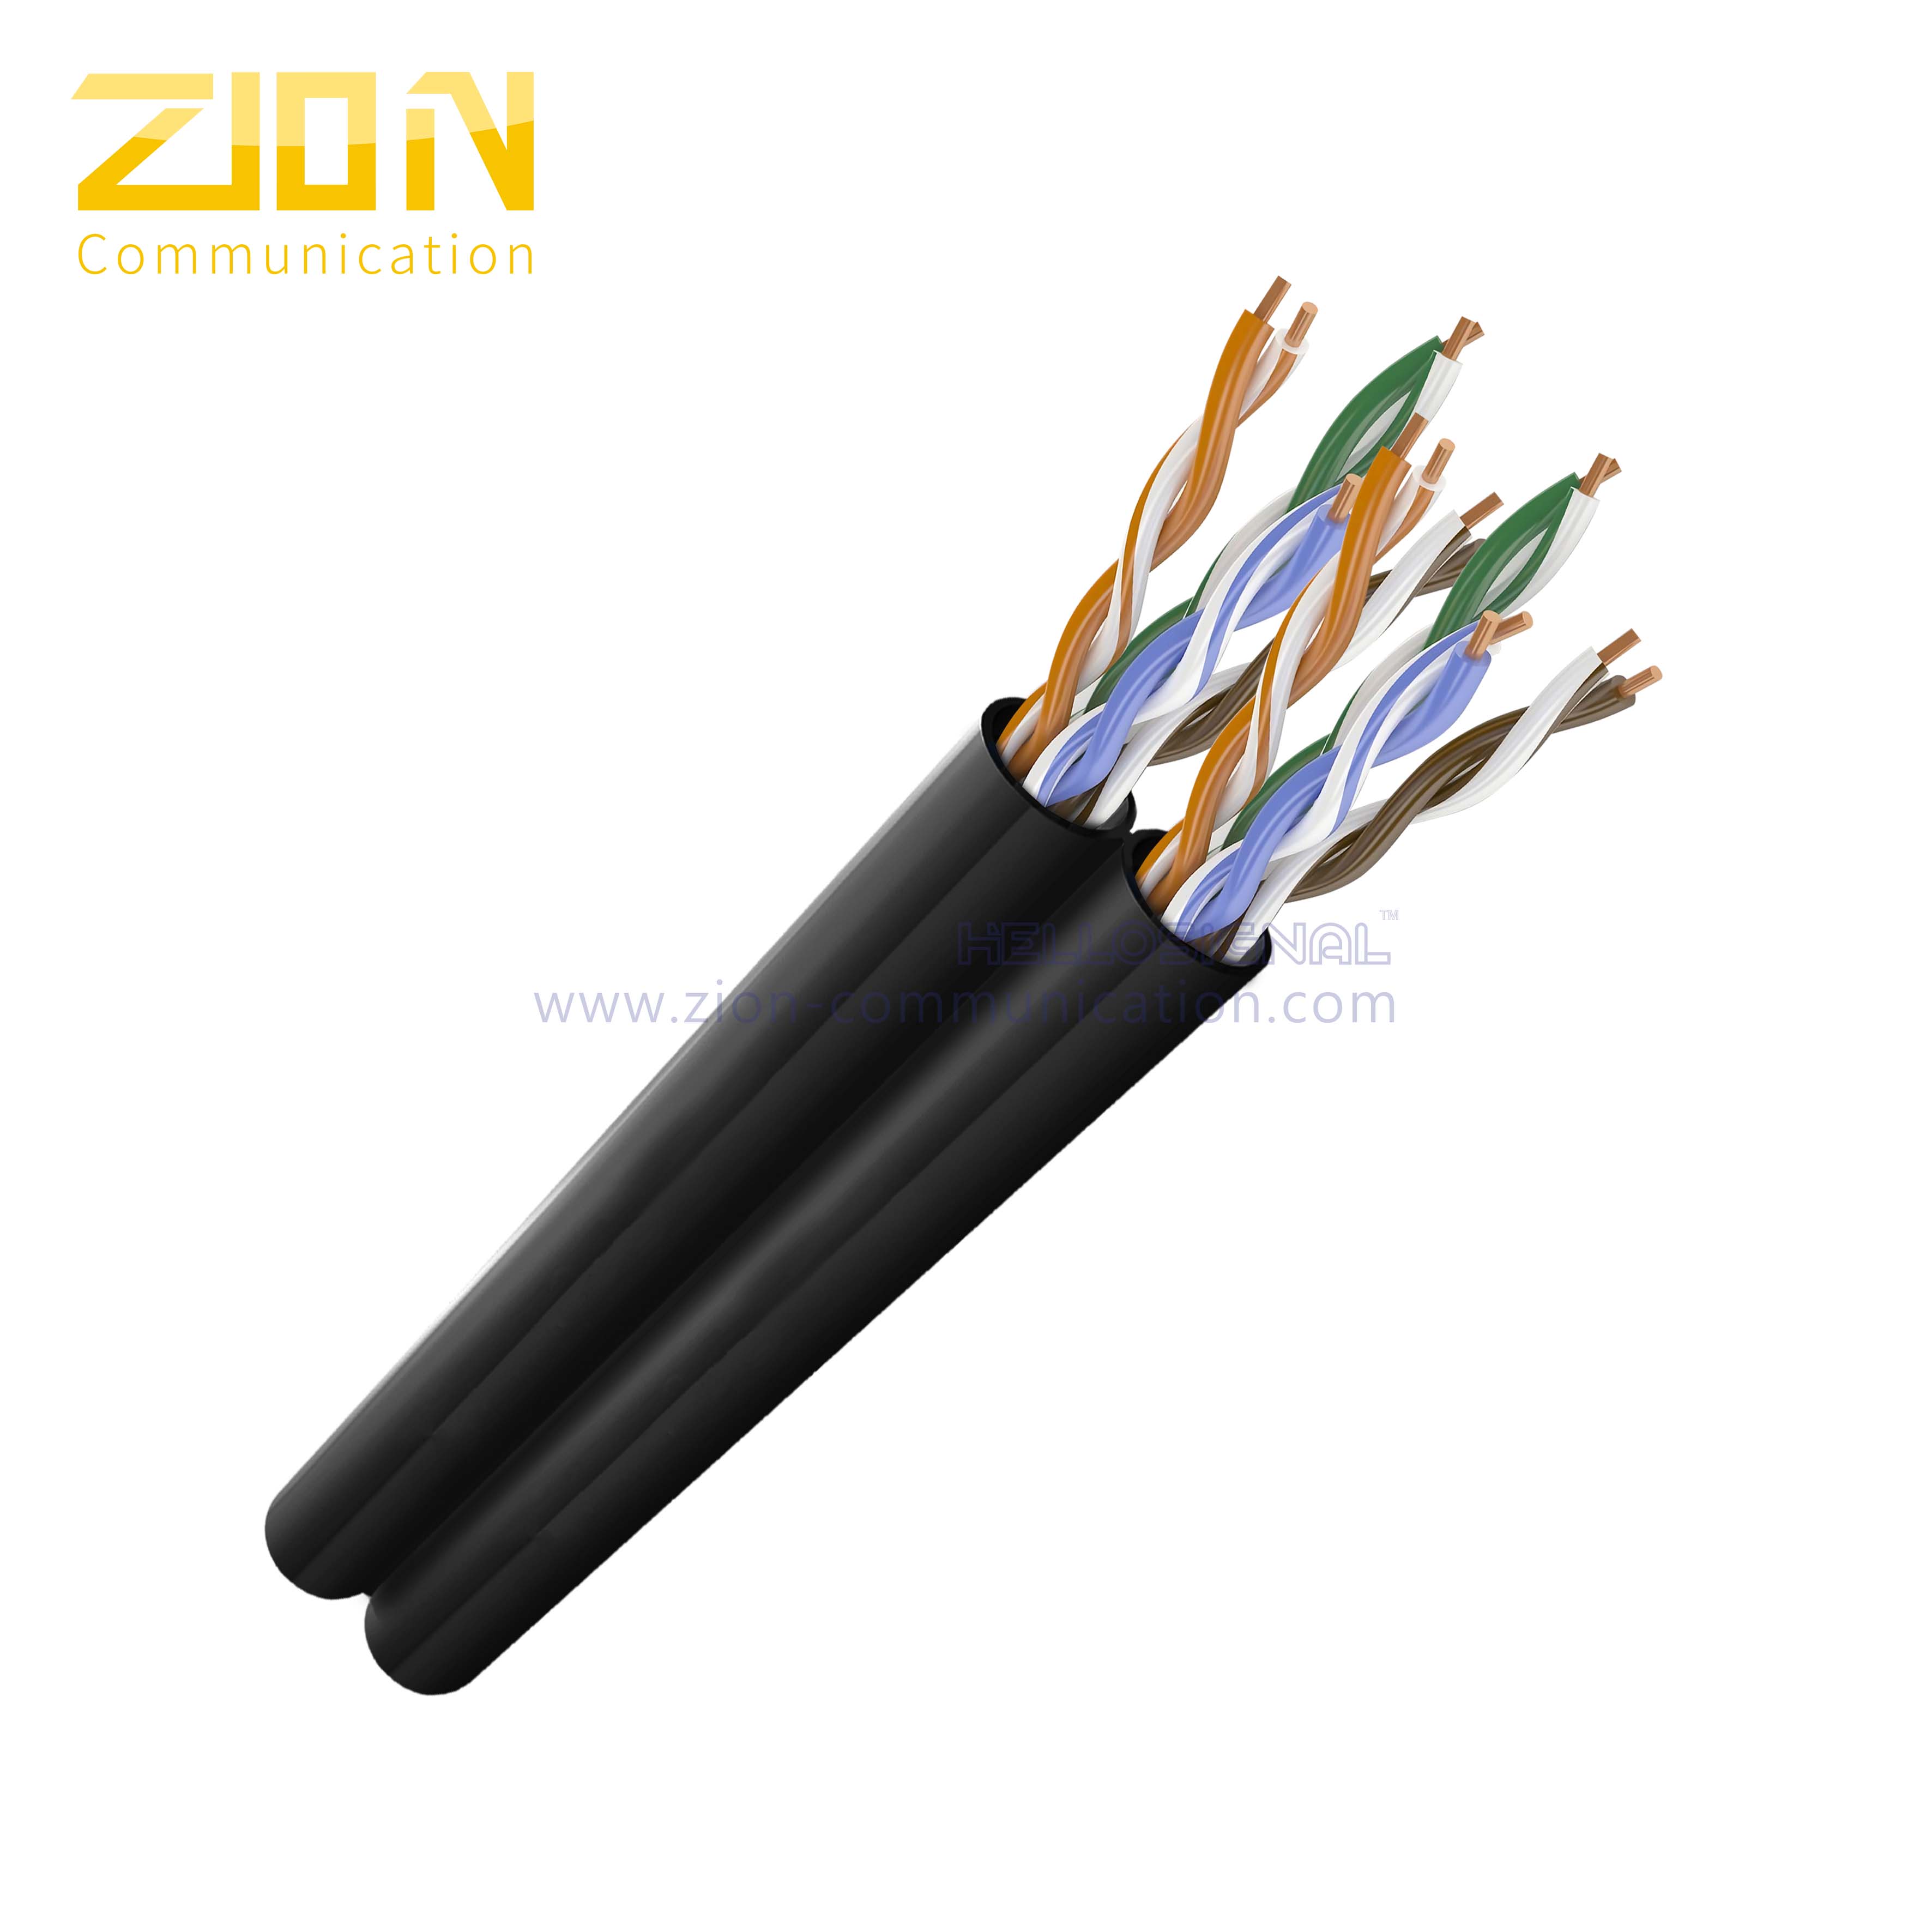 Tom Audreath Velocidad supersónica Atajos U/UTP Dual CAT 5E BC PE Twisted Pair Installation Cable from China  manufacturer - Zion Communication is a professional manufacturer of cables  and accessories for signal and low voltage transmission.